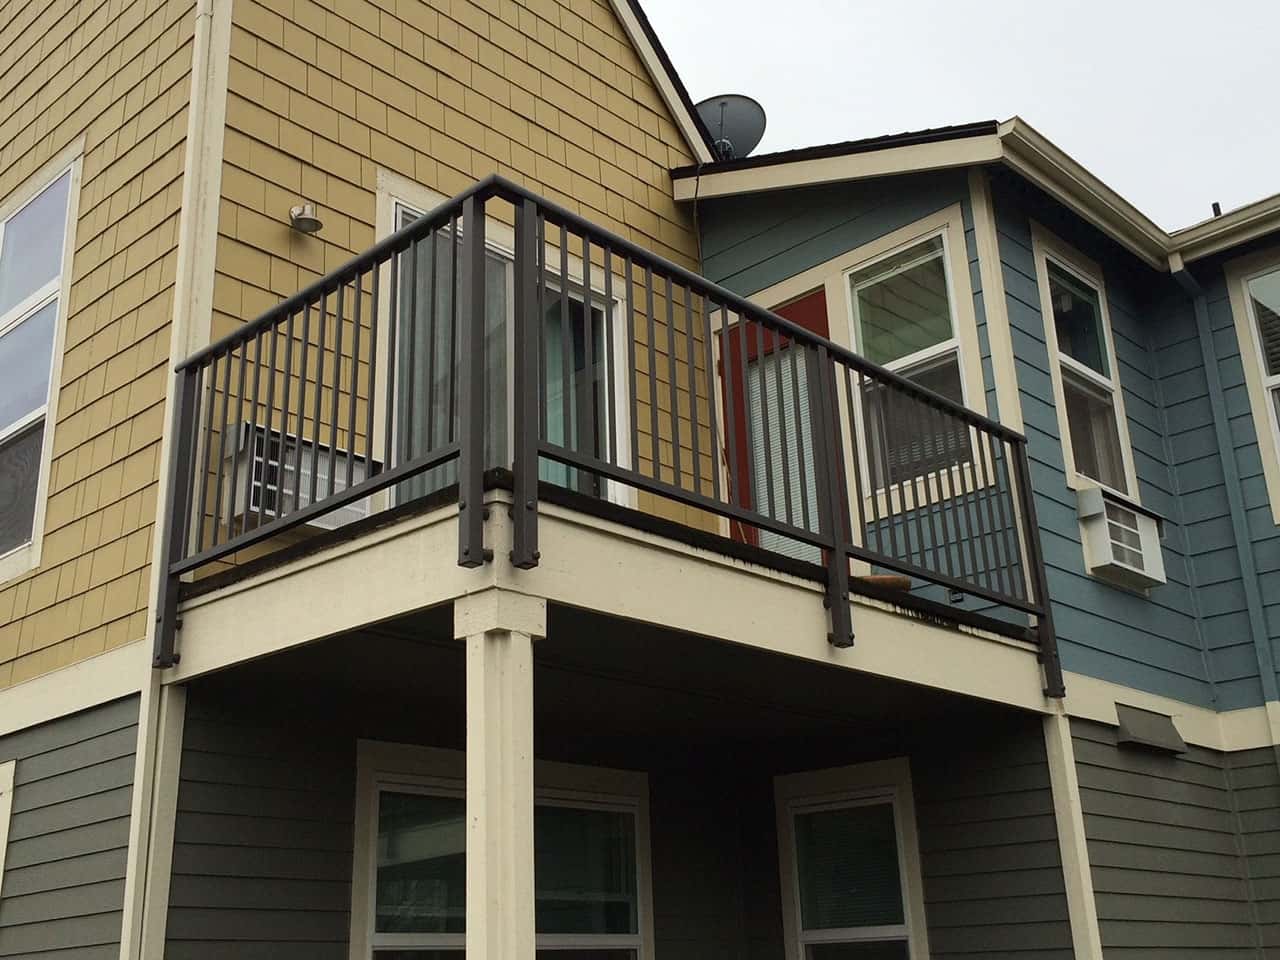 Deck Railing Systems at